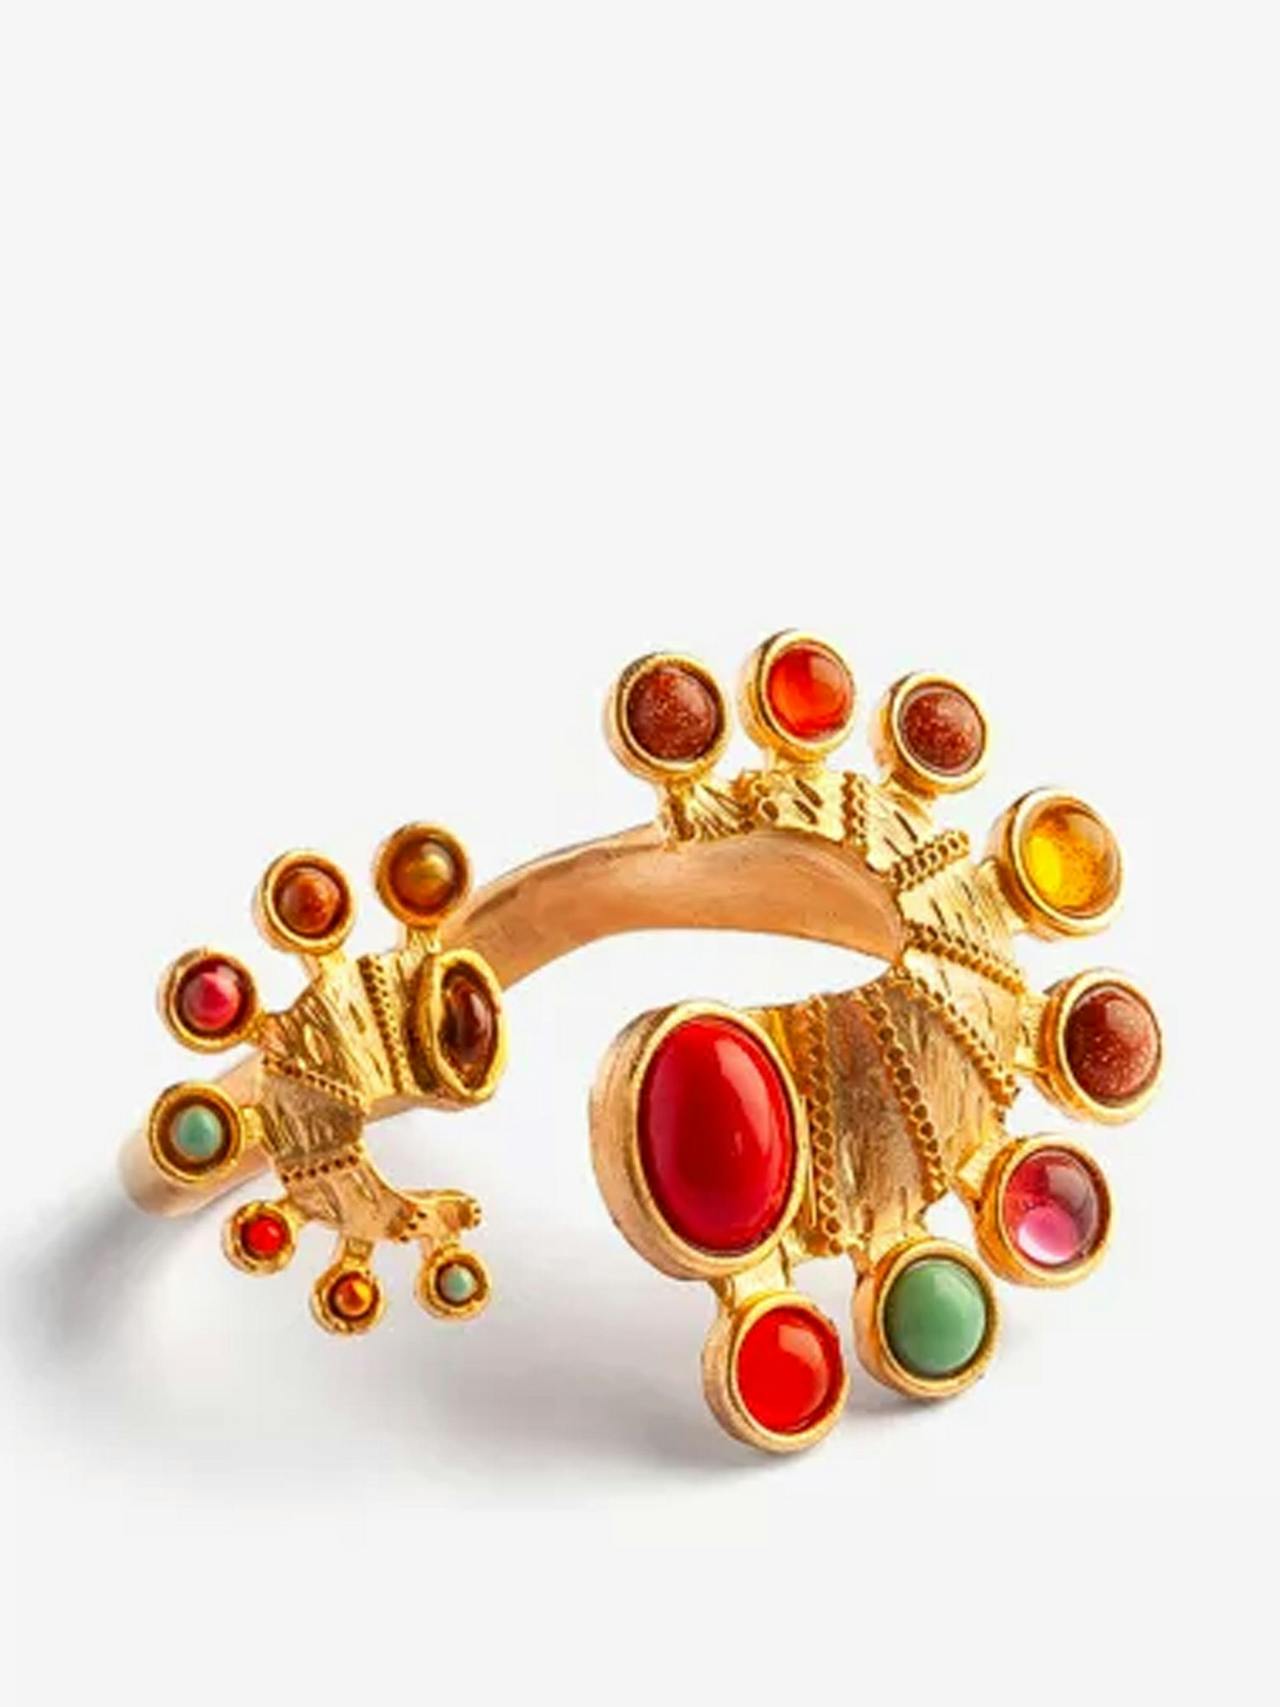 Sonia Petroff Seahorse gold-plated brass and gemstone ring